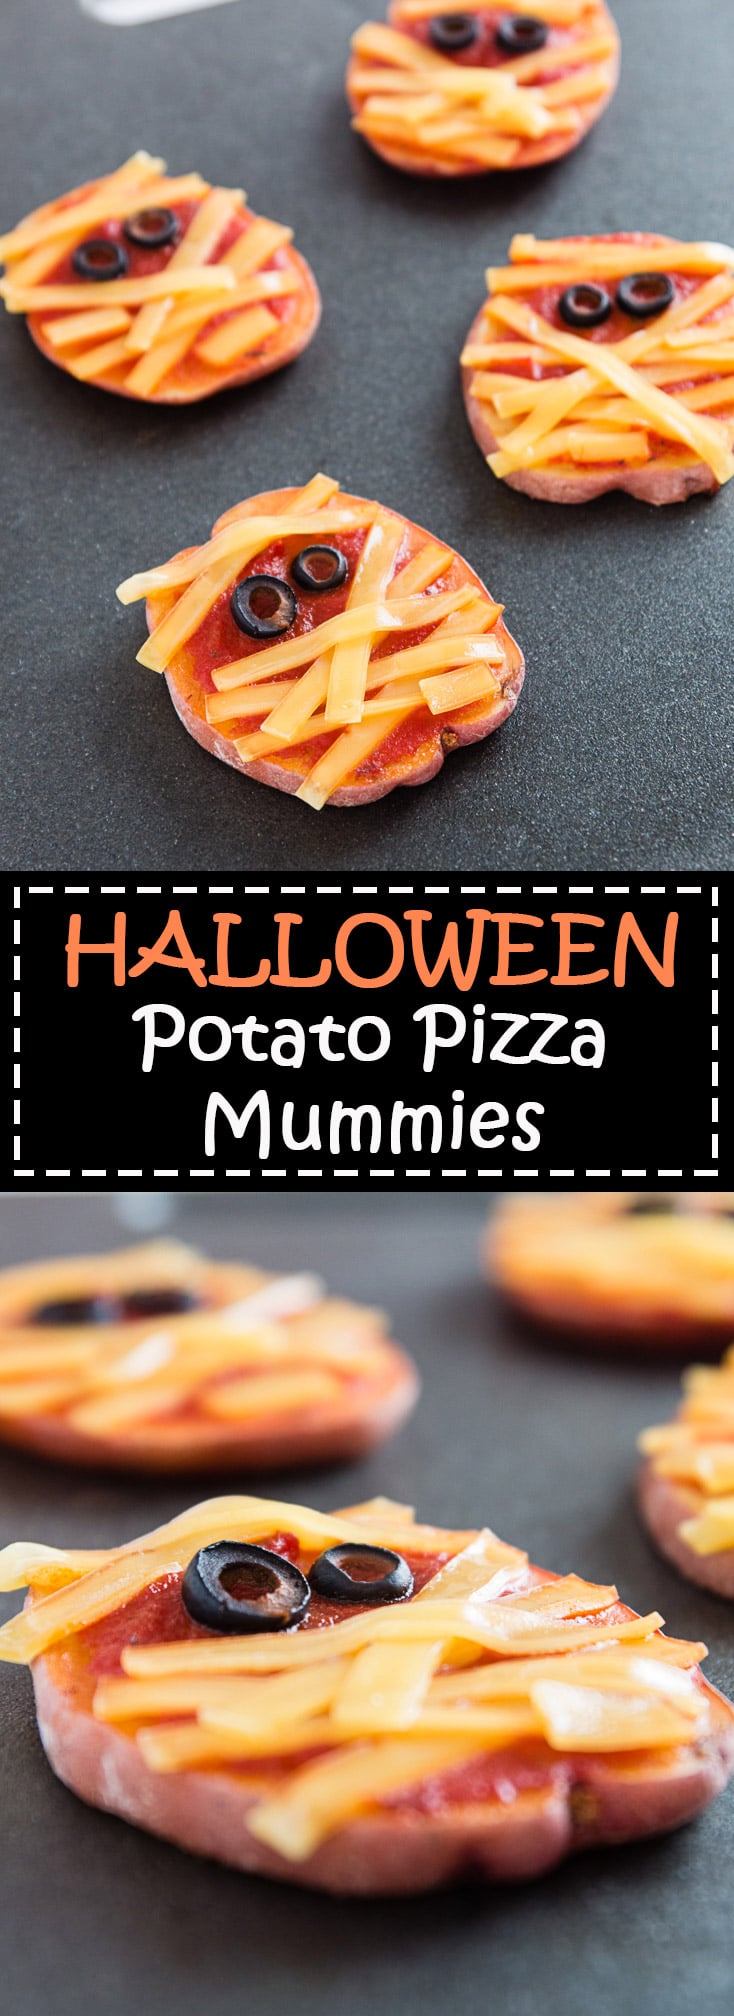 These Halloween Potato Pizza Mummies are perfect for a quick, easy, and fun dinner idea! #vegan #glutenfree | vegetariangastronomy.com